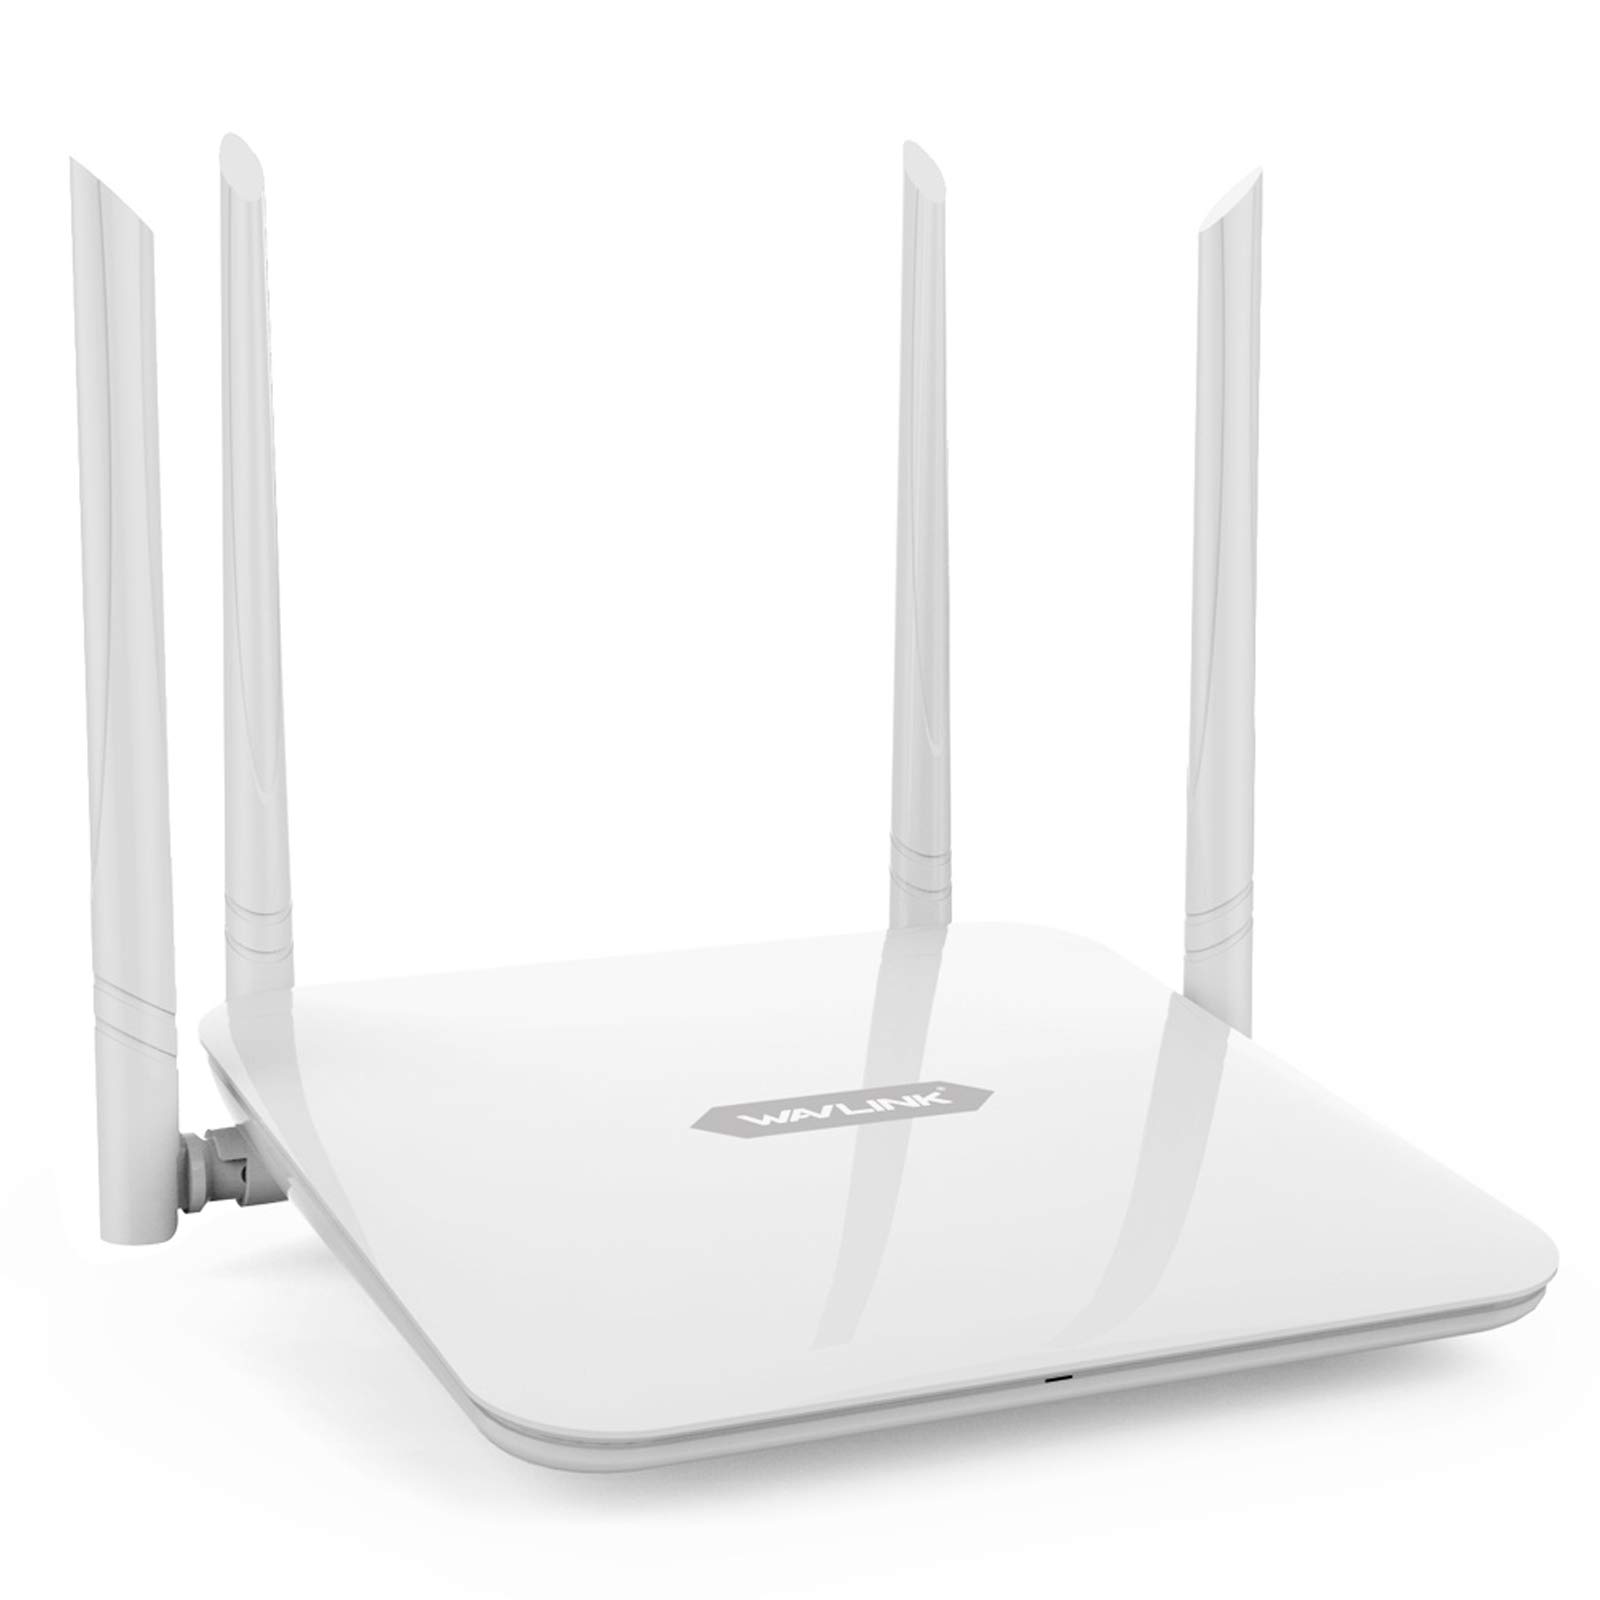 Device and WiFi router reset